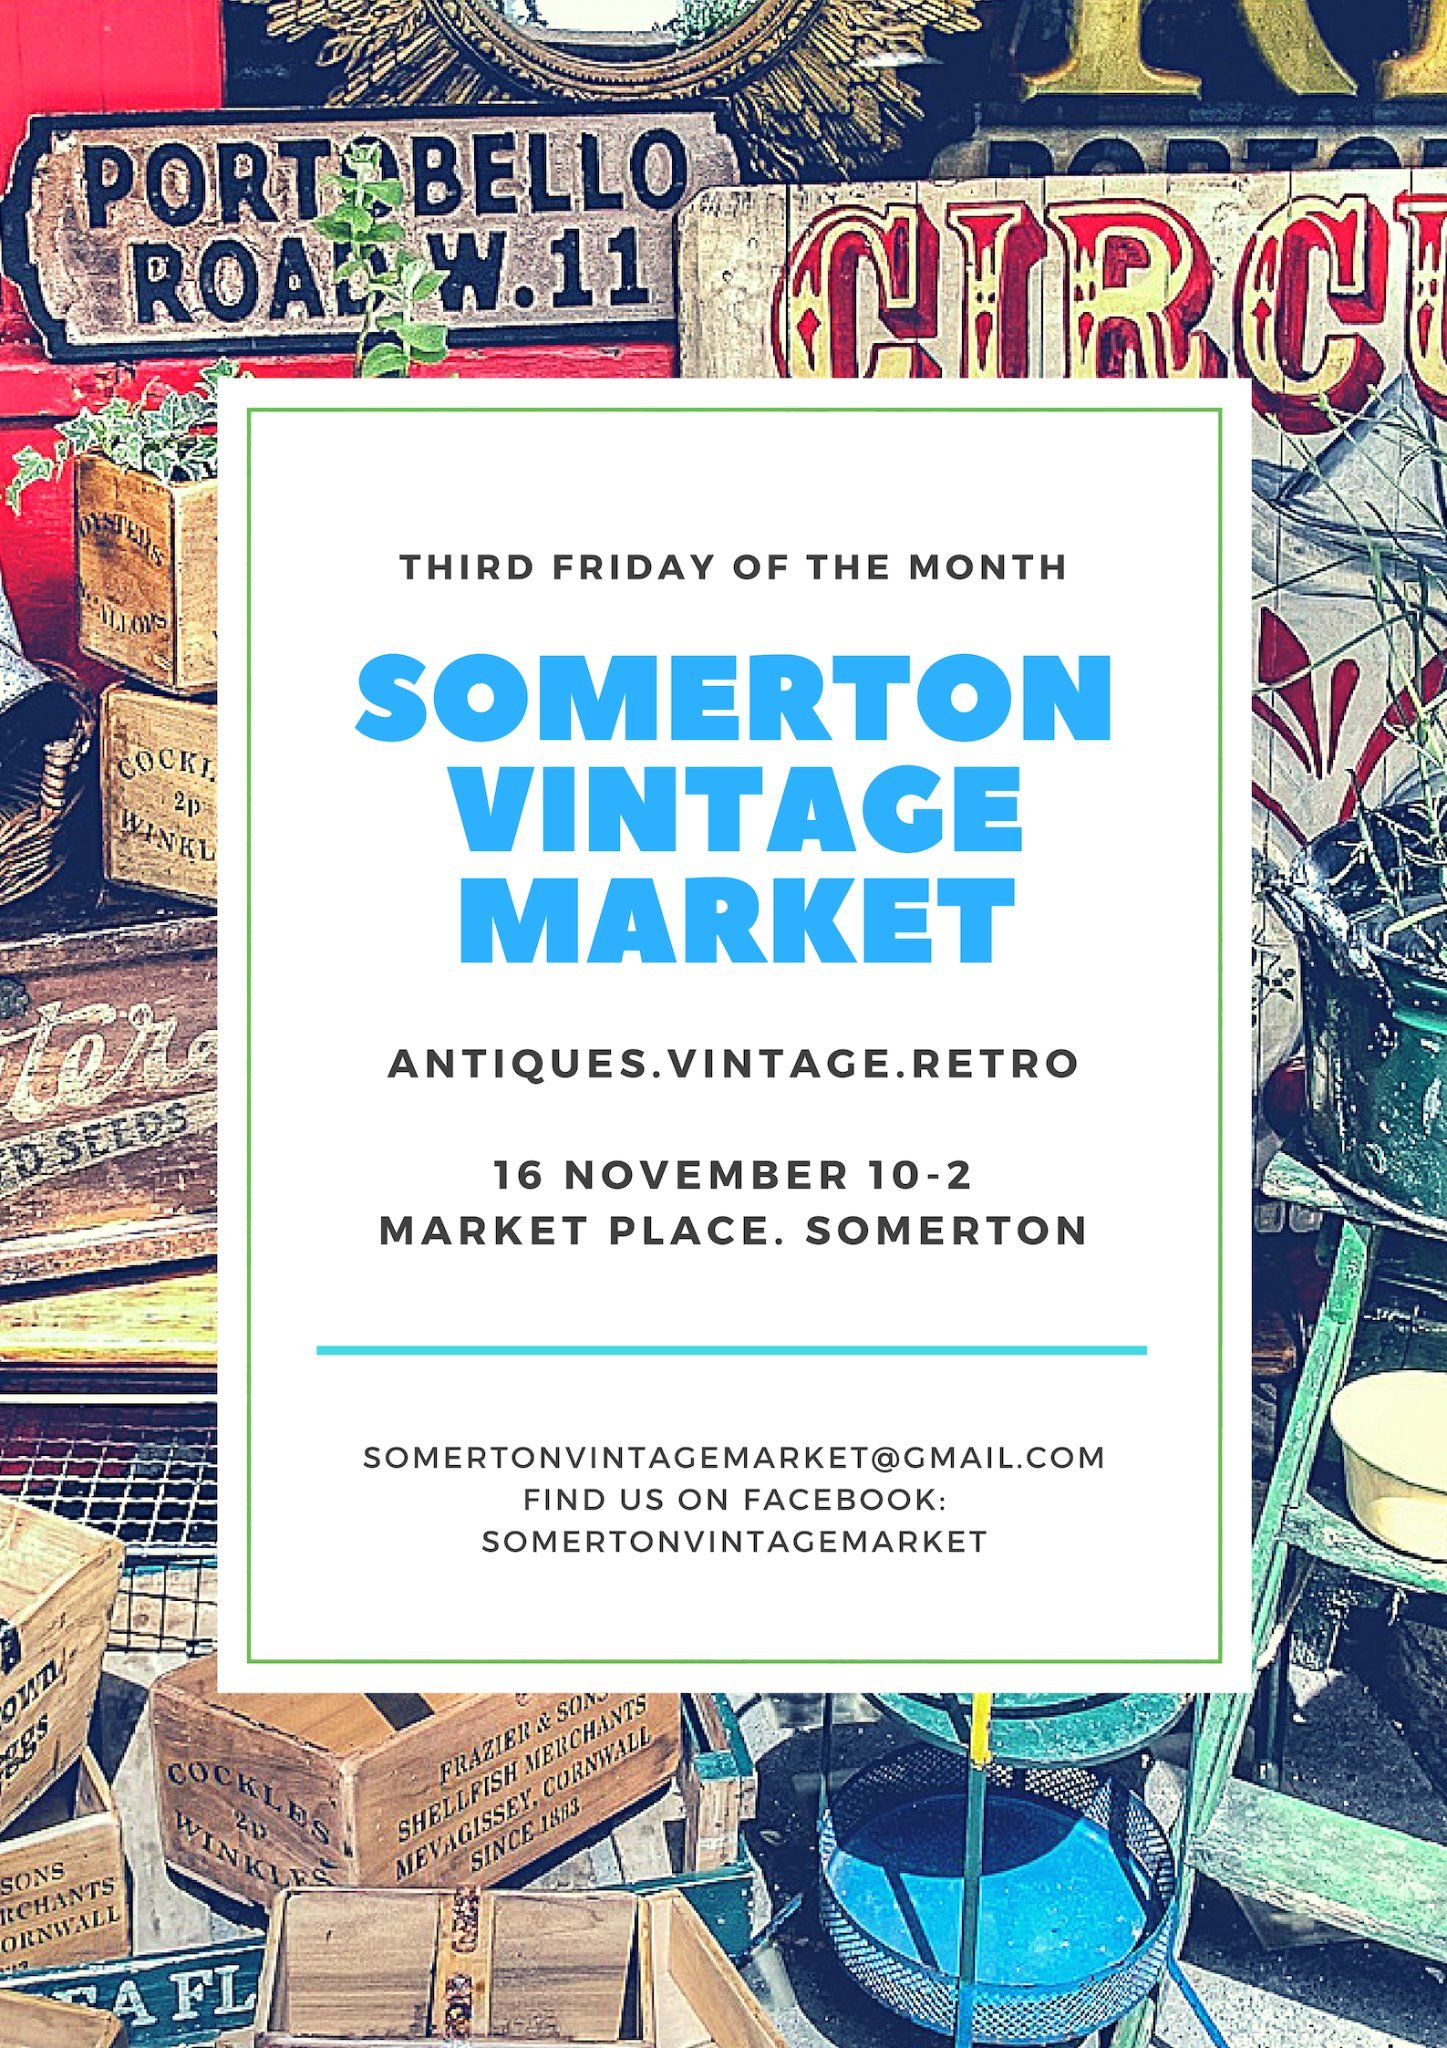 On the 3rd Friday of every month (except Jan & Feb) 10am-2pm. There is an amazing variety of vintage stalls,  antiques & great retro finds!